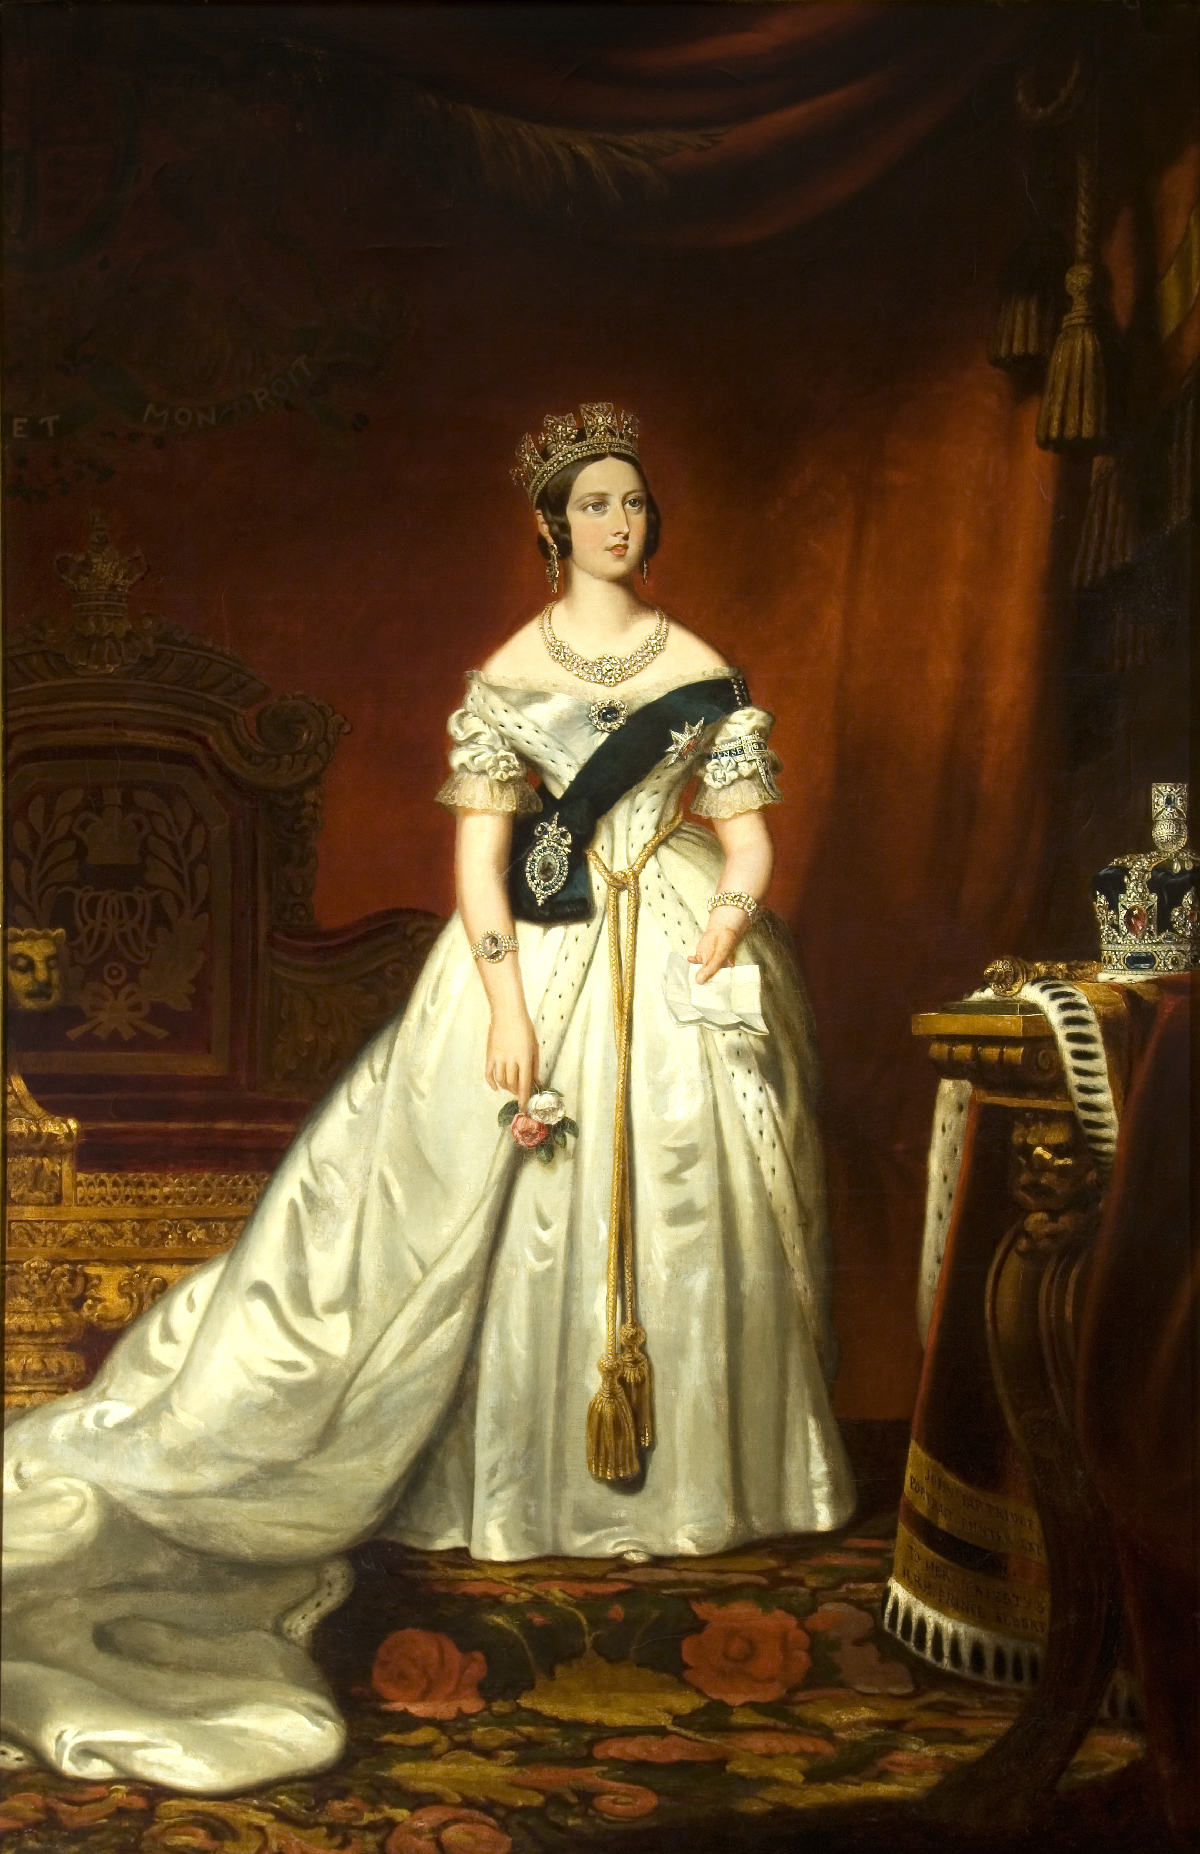 NPG D34182; Reproduction of letter from Queen Victoria - Portrait -  National Portrait Gallery